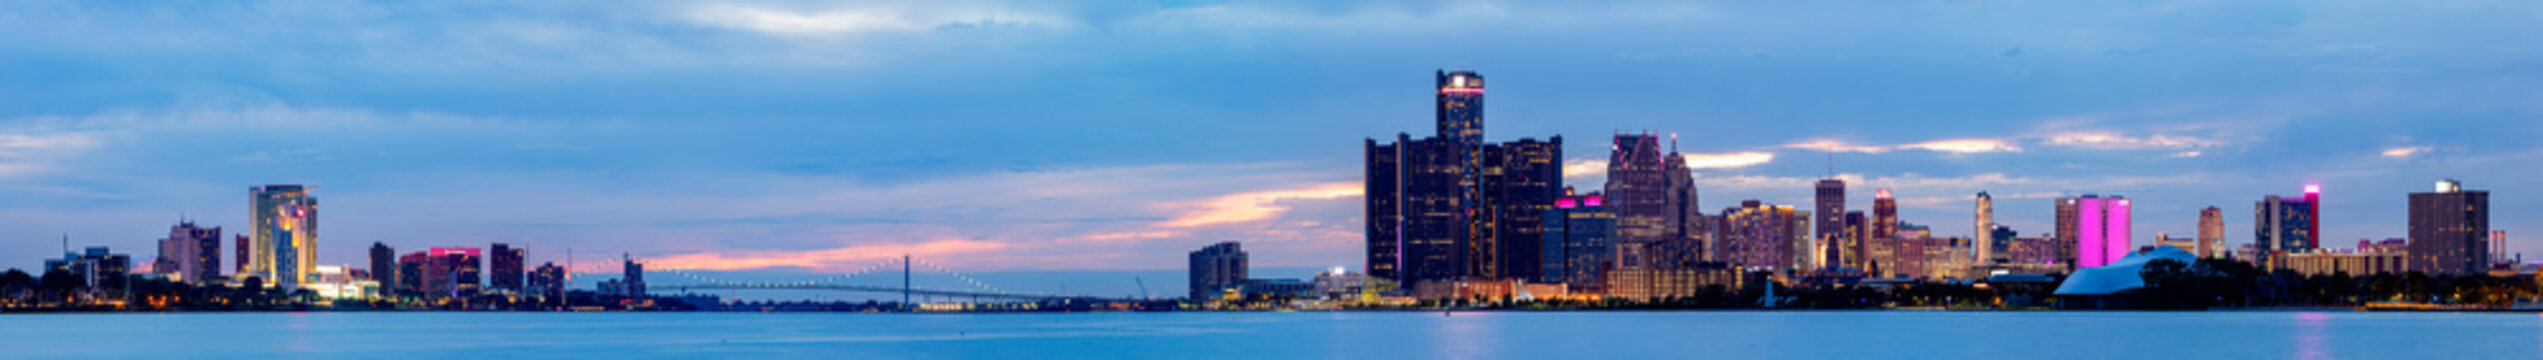 The Cities of Detroit and Windsor